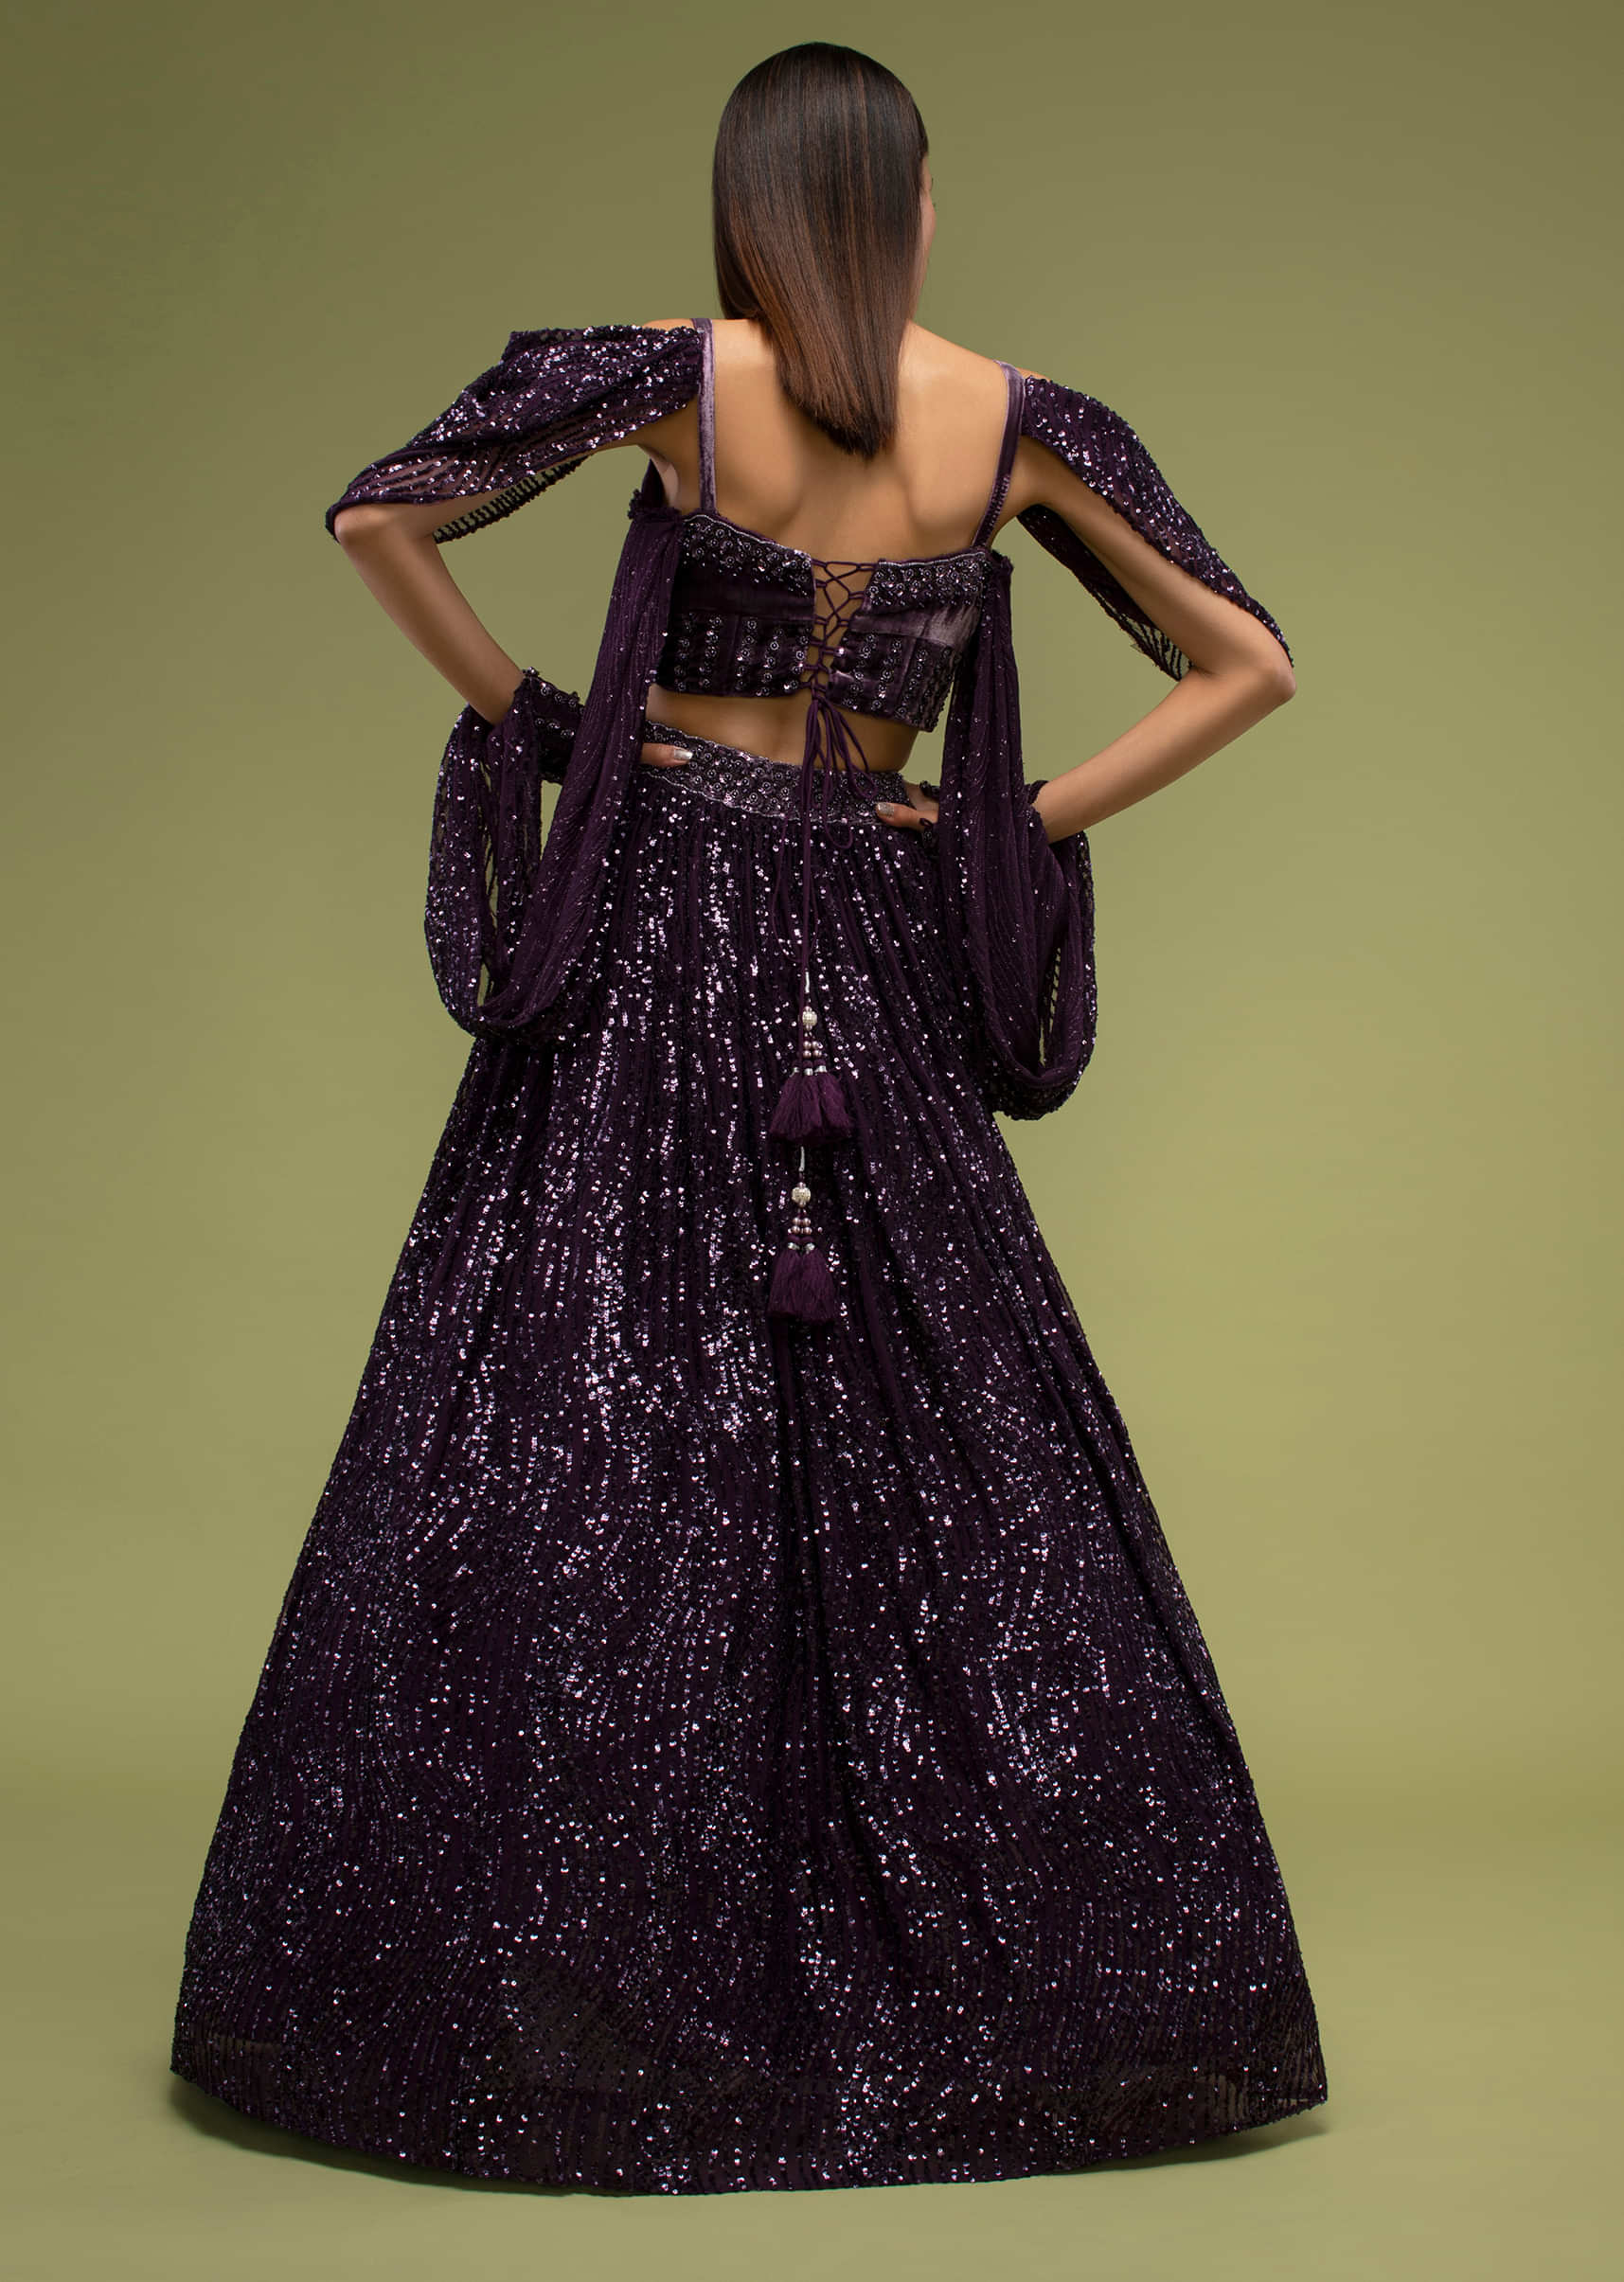 Plum Violet Lehenga And Crop Top In Velvet, Paired With A Cape  Crafted Iin Net With Cuffs At The Border